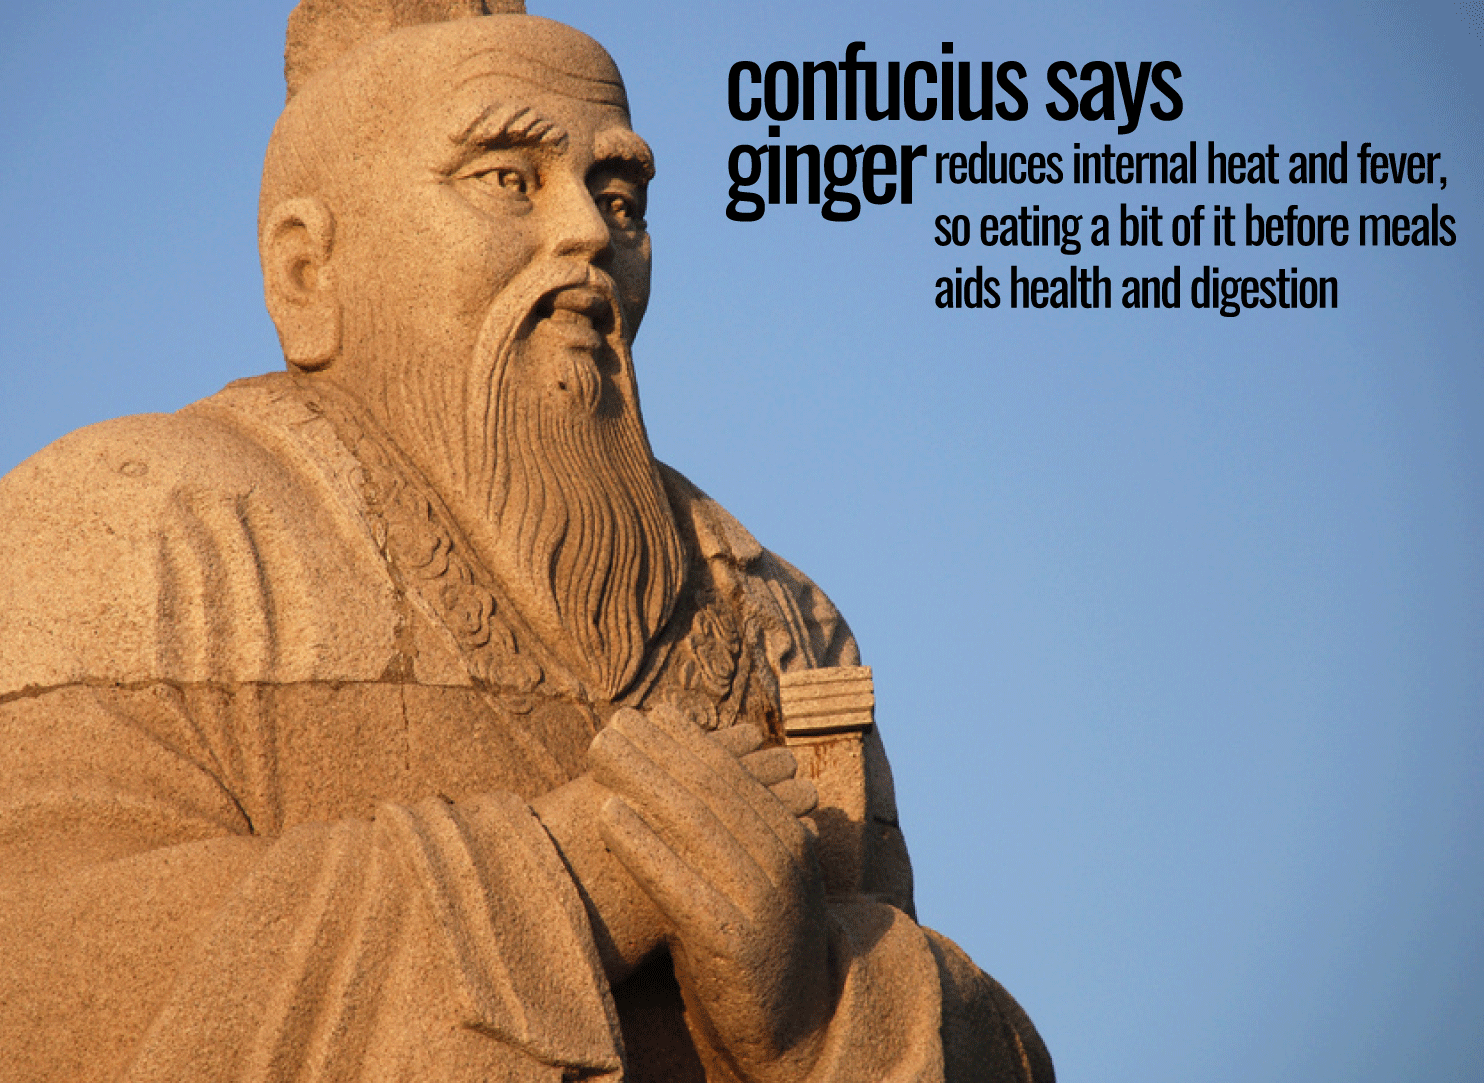 Confucius-says-ginger-aids-health-and-digestion